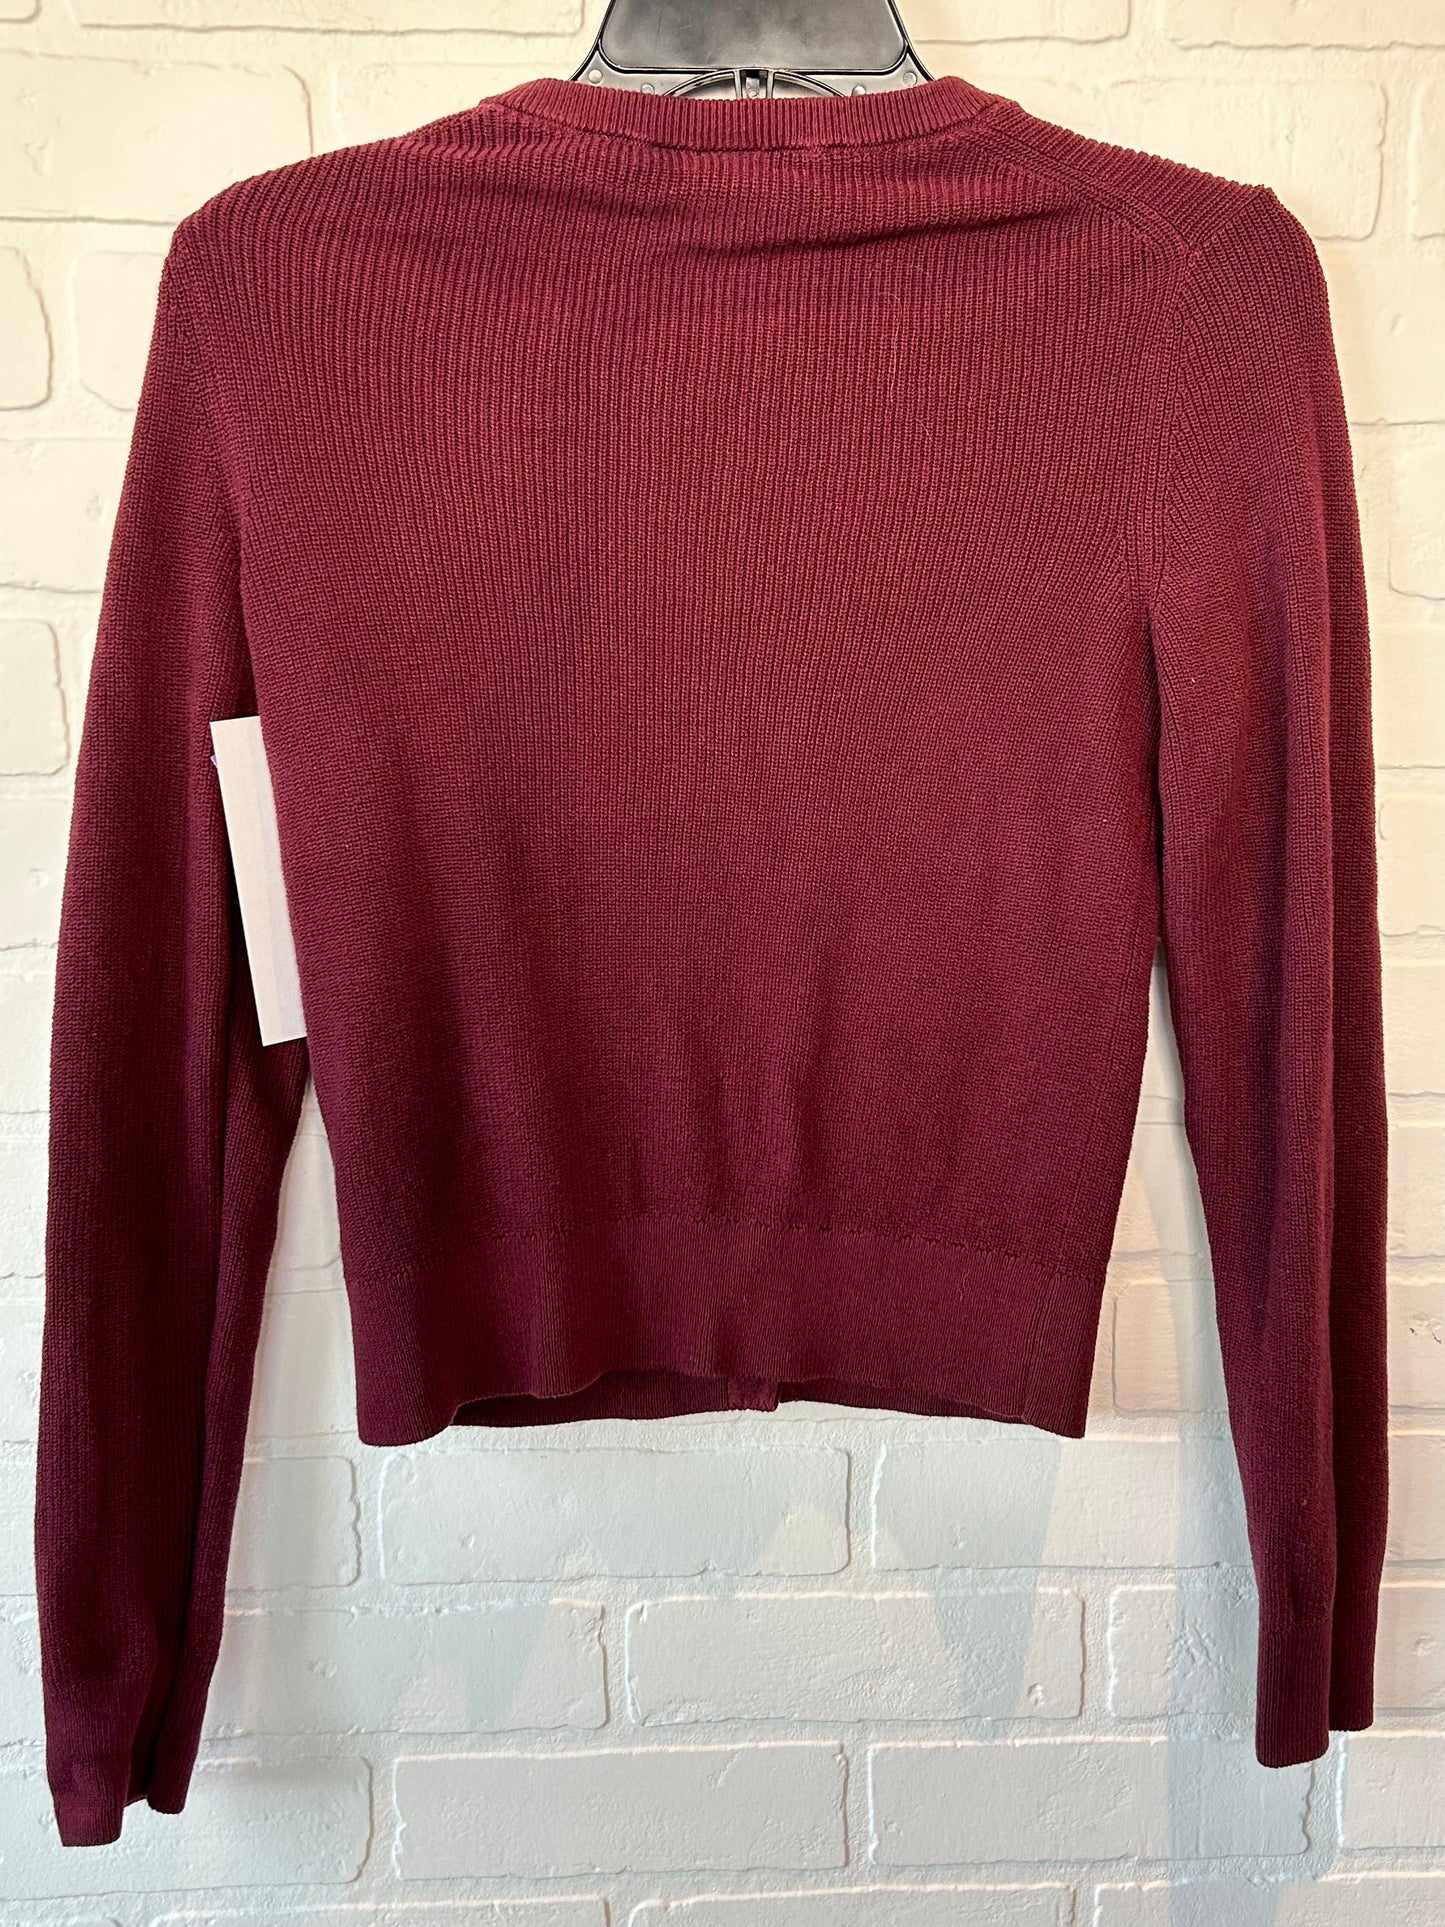 Red Sweater Gap, Size Xs